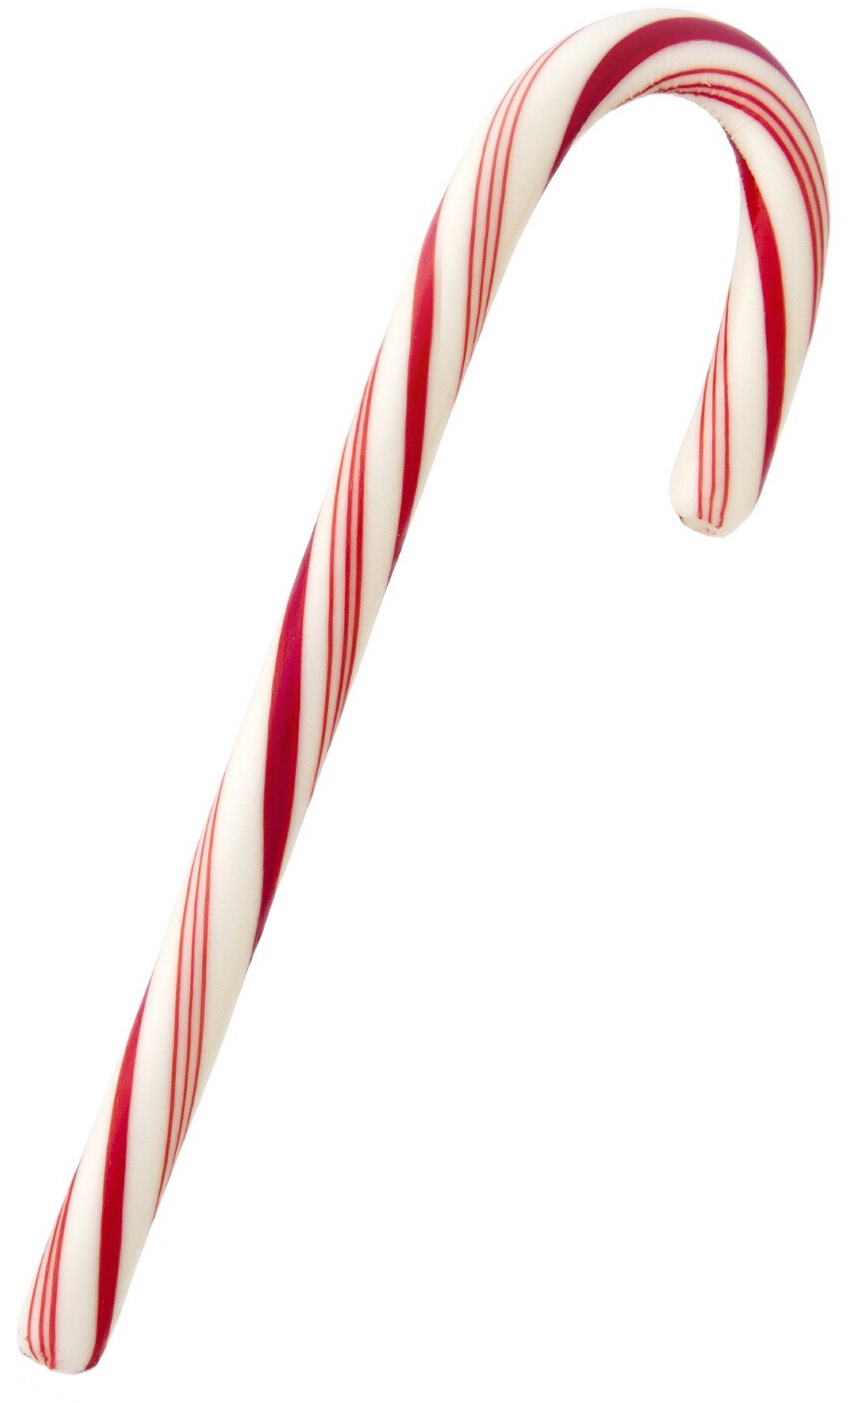 A Candy Cane On A Black Background